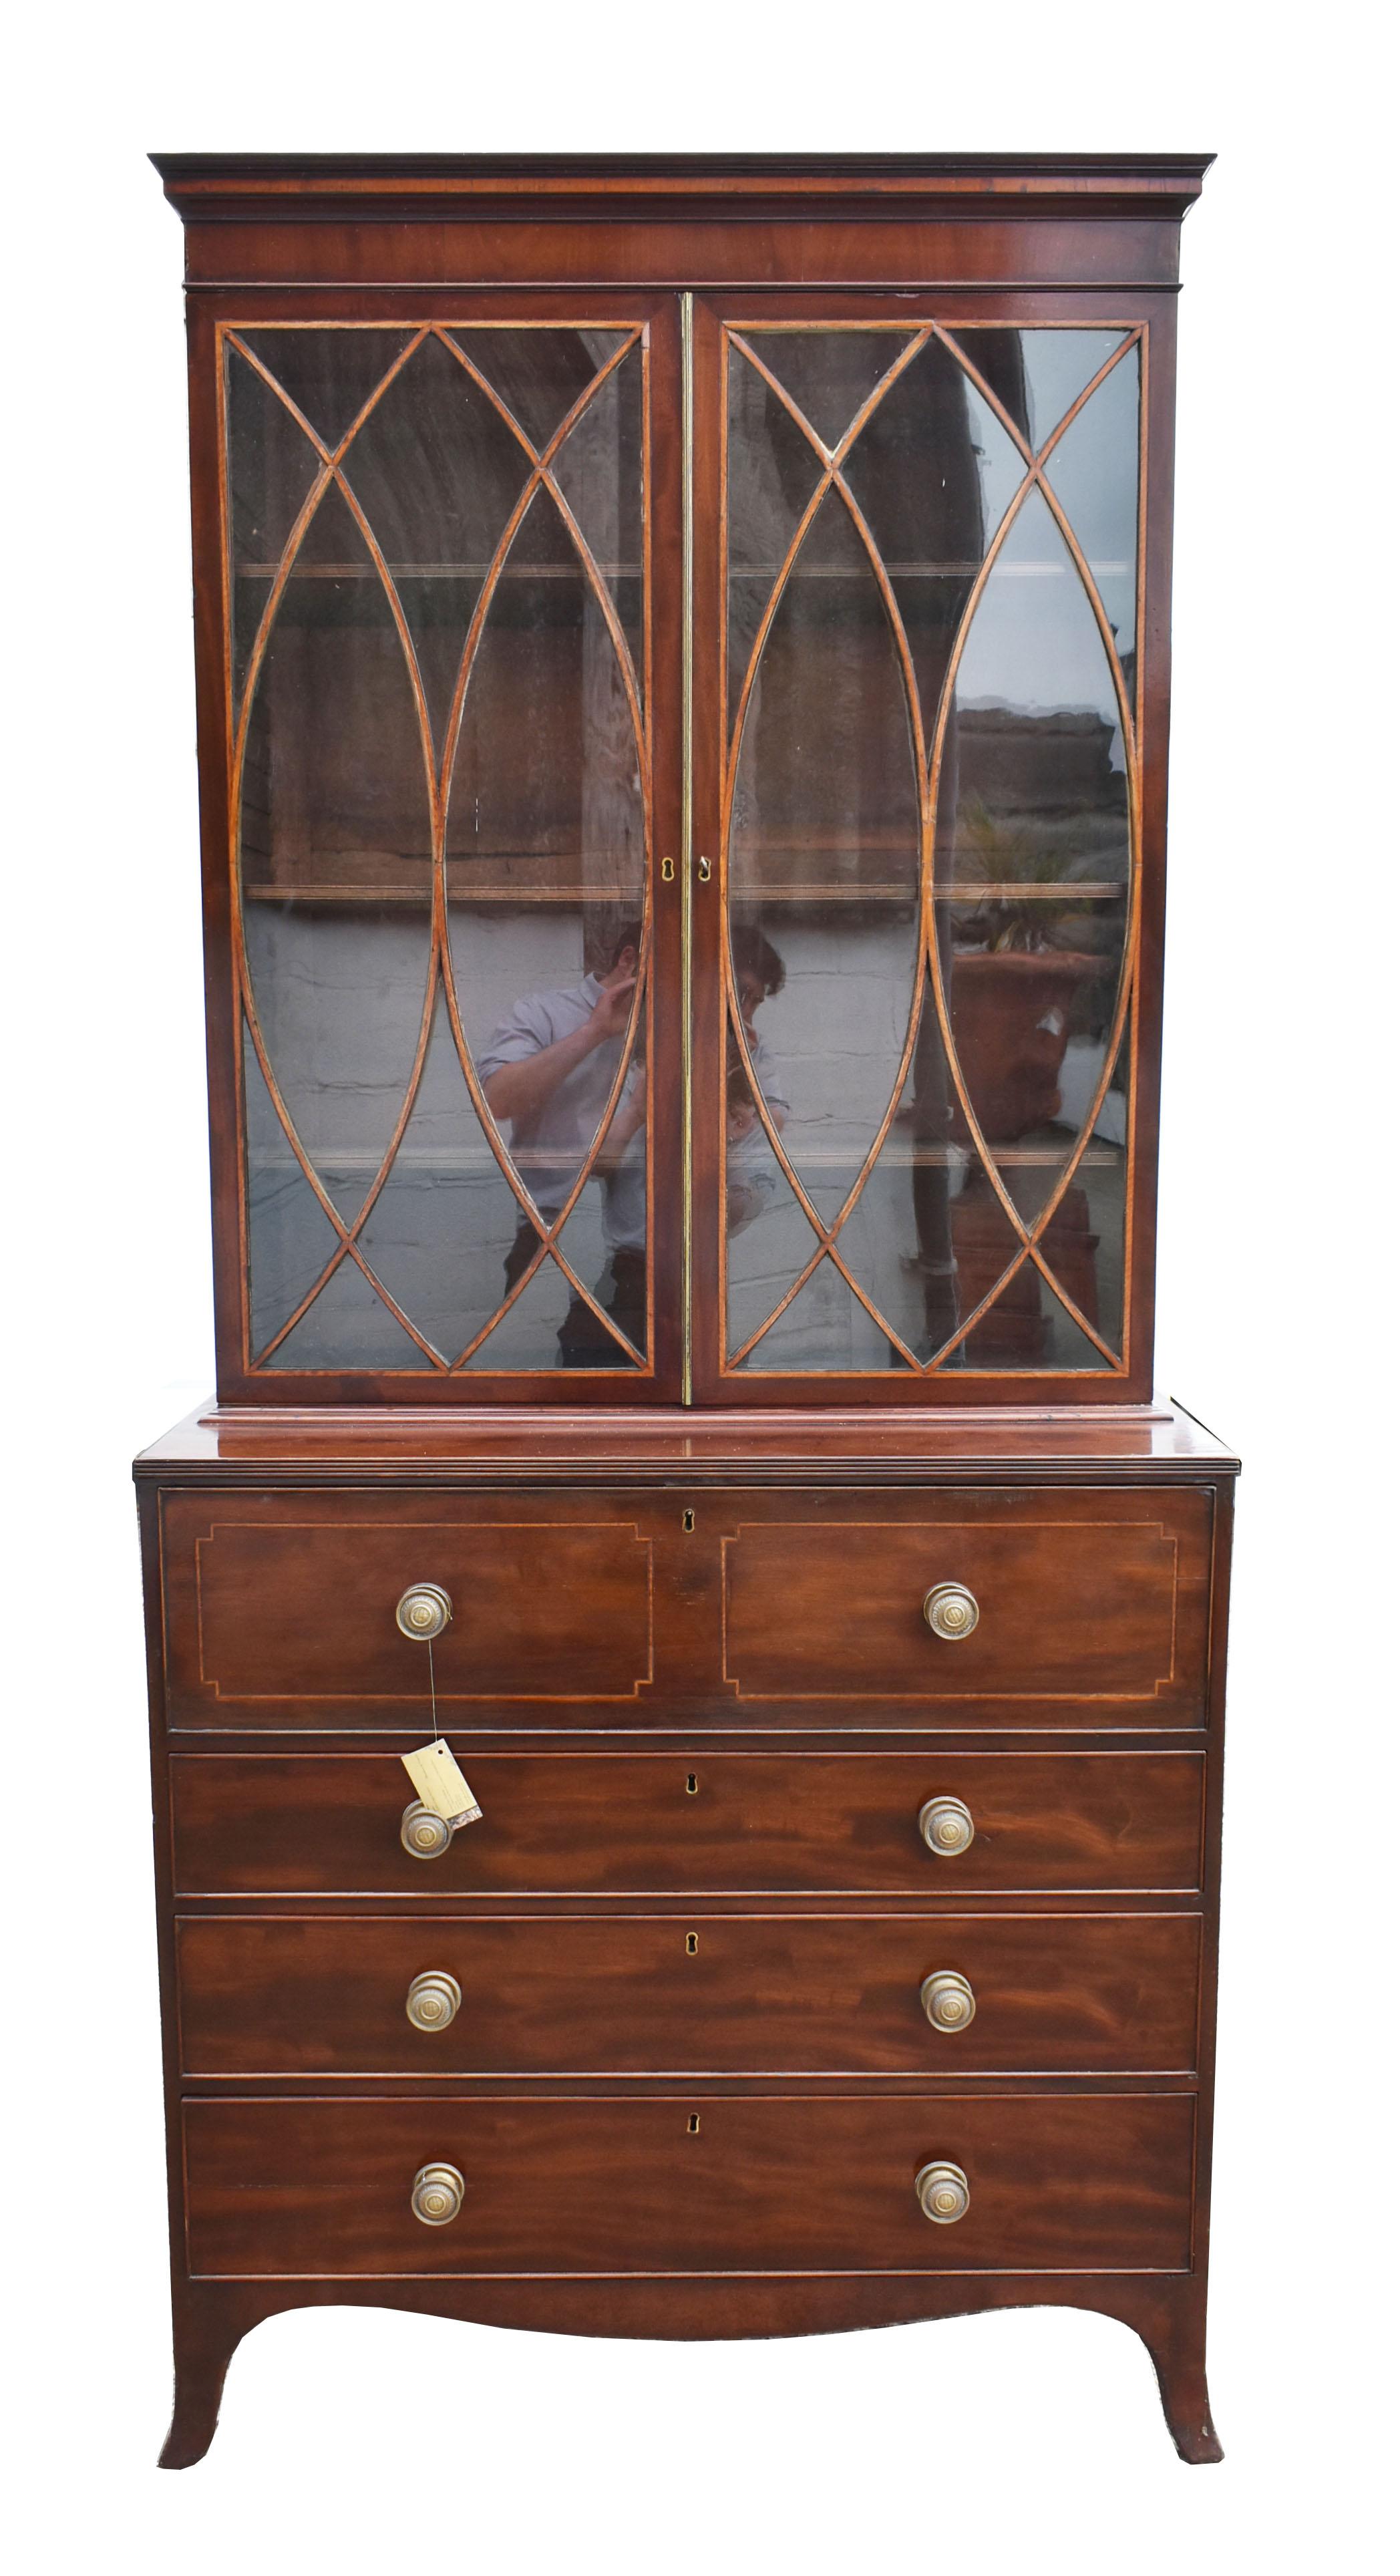 For sale is a fine quality George III mahogany secretaire bookcase, having two glazed doors, each with satinwood veneered elliptical glazing bars, opening to reveal three adjustable shelves. Below this, the secretaire drawer, having a fall front,